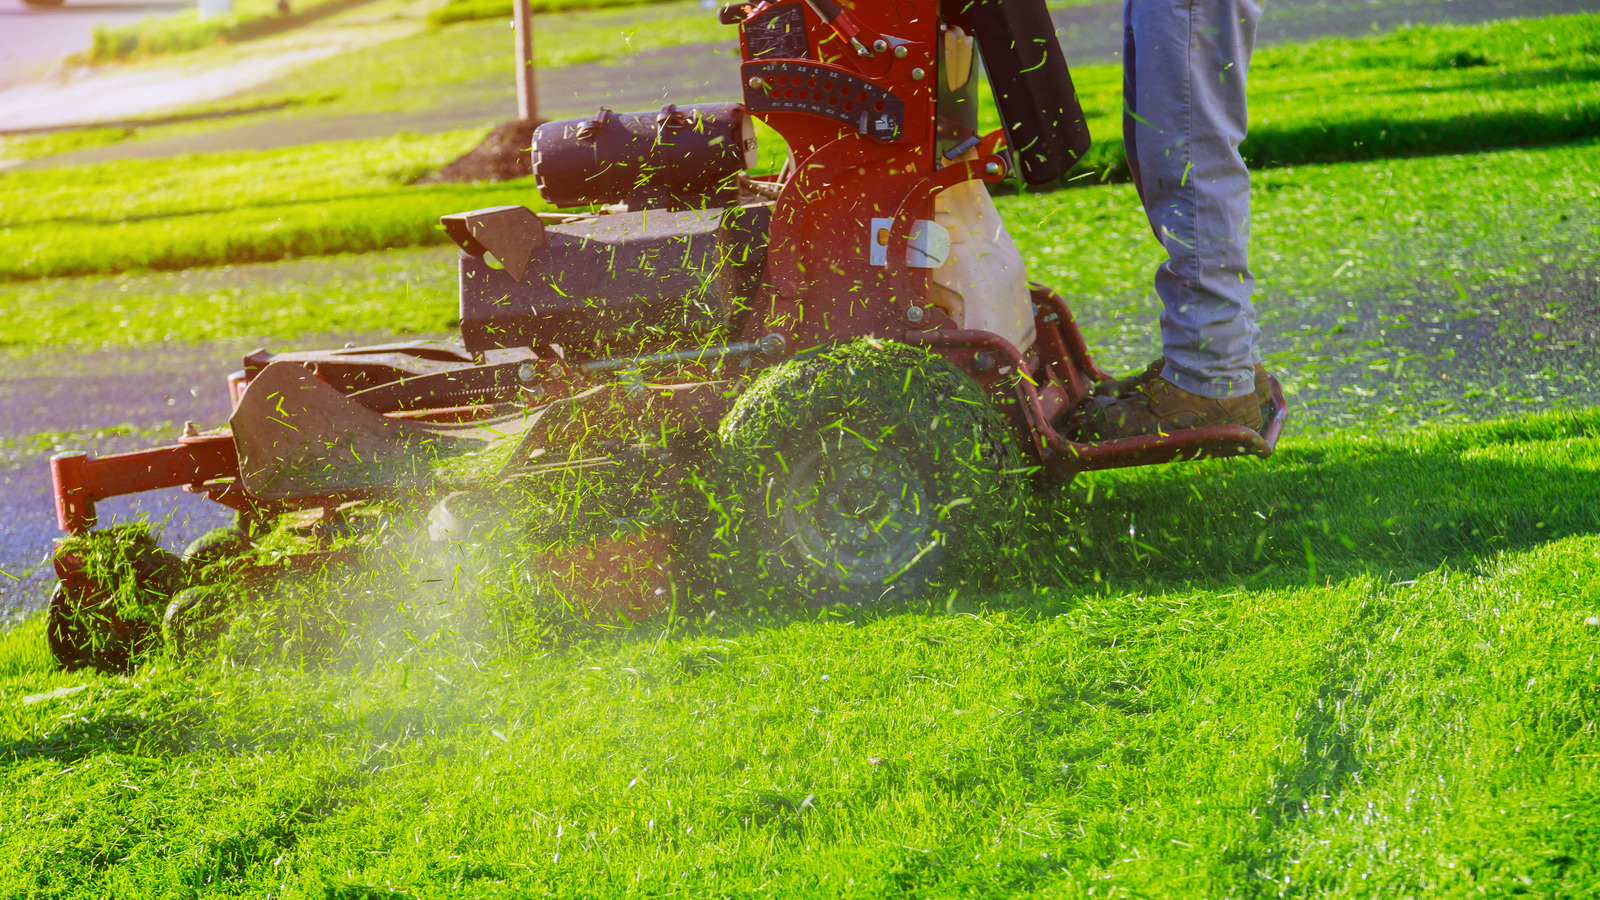 Kawasaki Vs. Kohler Lawn Mower Engines: How Carry out They Stack Up?